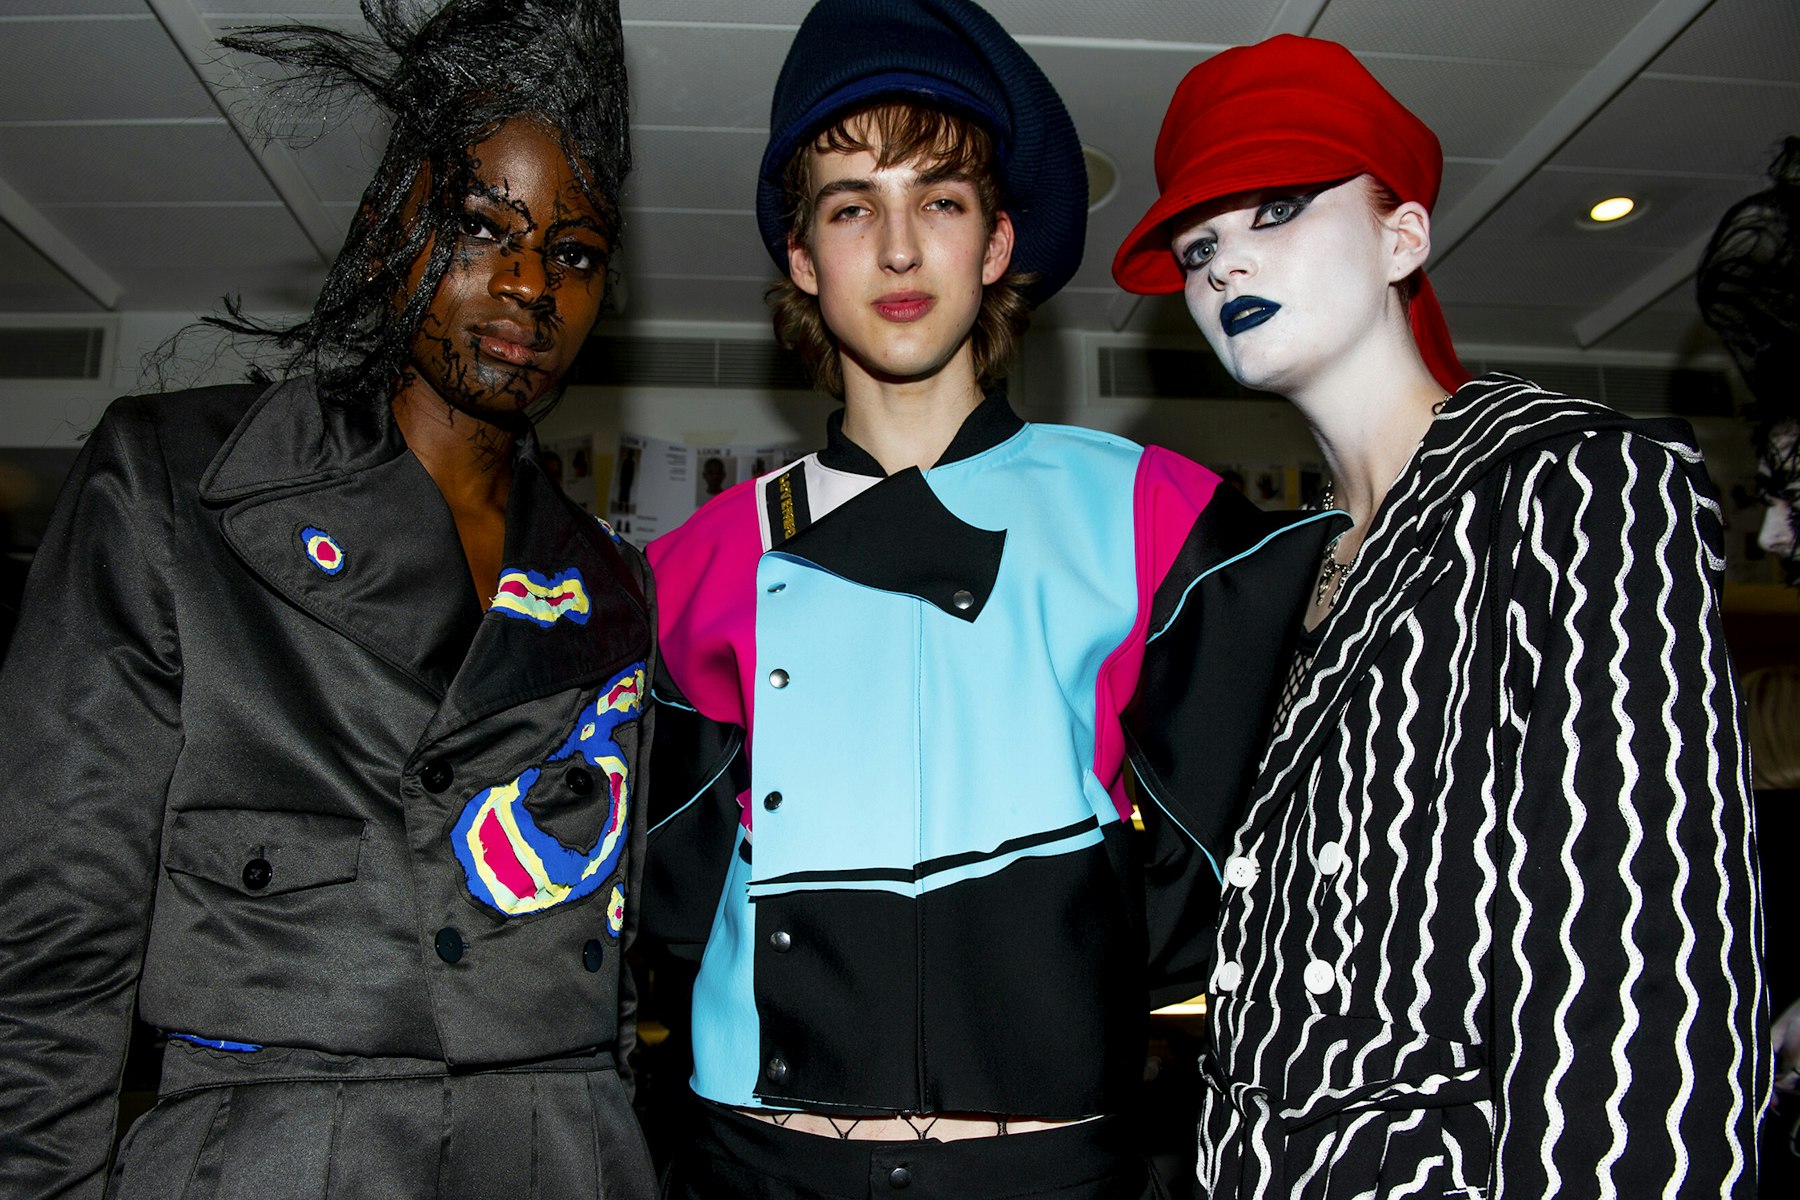 Rebellion, angst and literature at Charles Jeffrey LOVERBOY - The Face